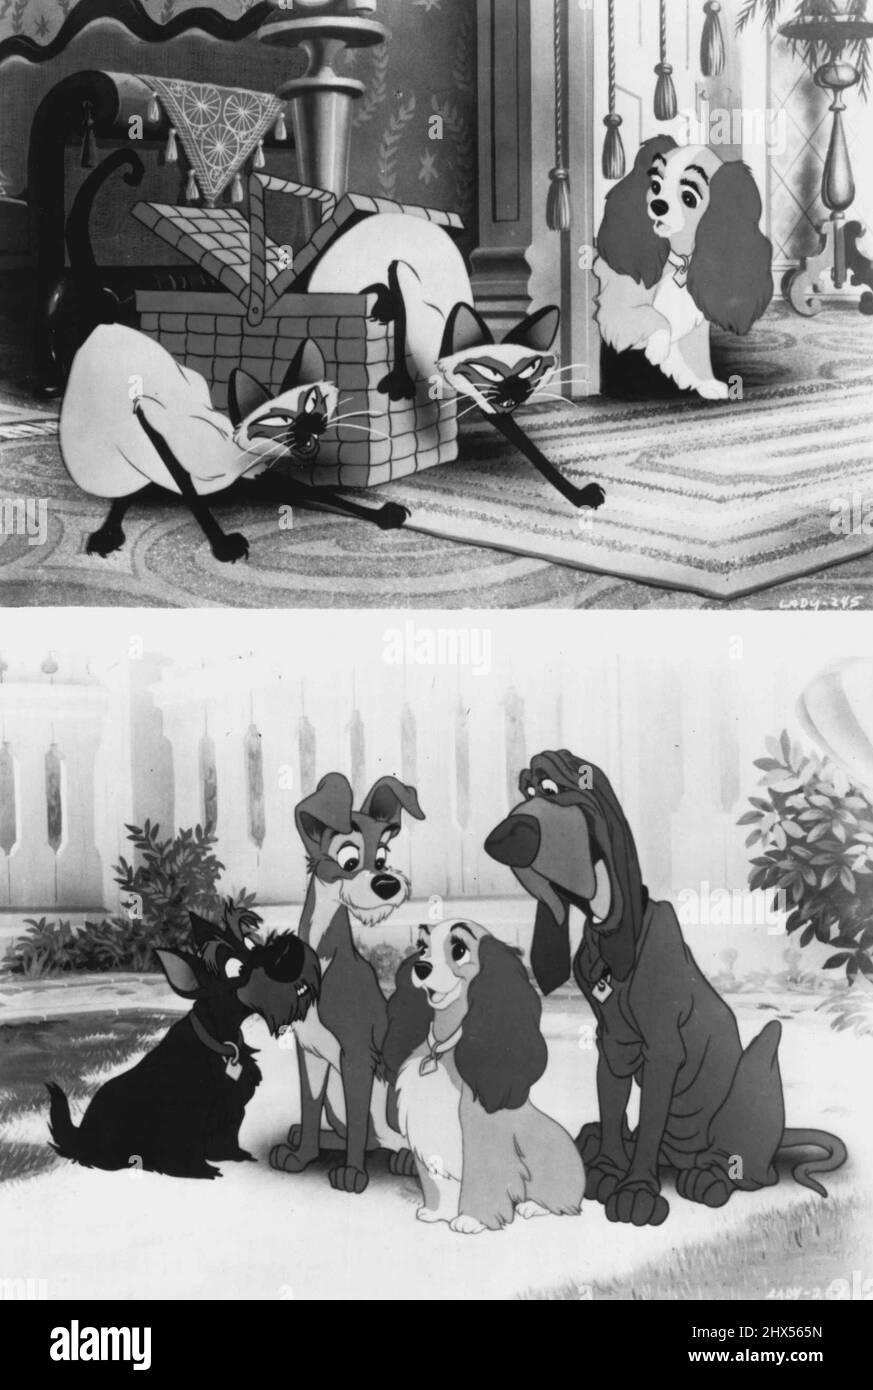 Lady meets Si and Am, two mischievous siamese cats, in a scene from Walt Disney classic Lady And The Tramp. Distributed in Australia by Roadshow Distributers. Rated G.Tramp introduces himself to Lady, Trusty the bloodhound and Jock the Scottish terrior in a scene from Walt Disney's classic Lady And The Tramp Distributed in Australia by Roadshow Distributers Rated G. January 01, 1955. Stock Photo